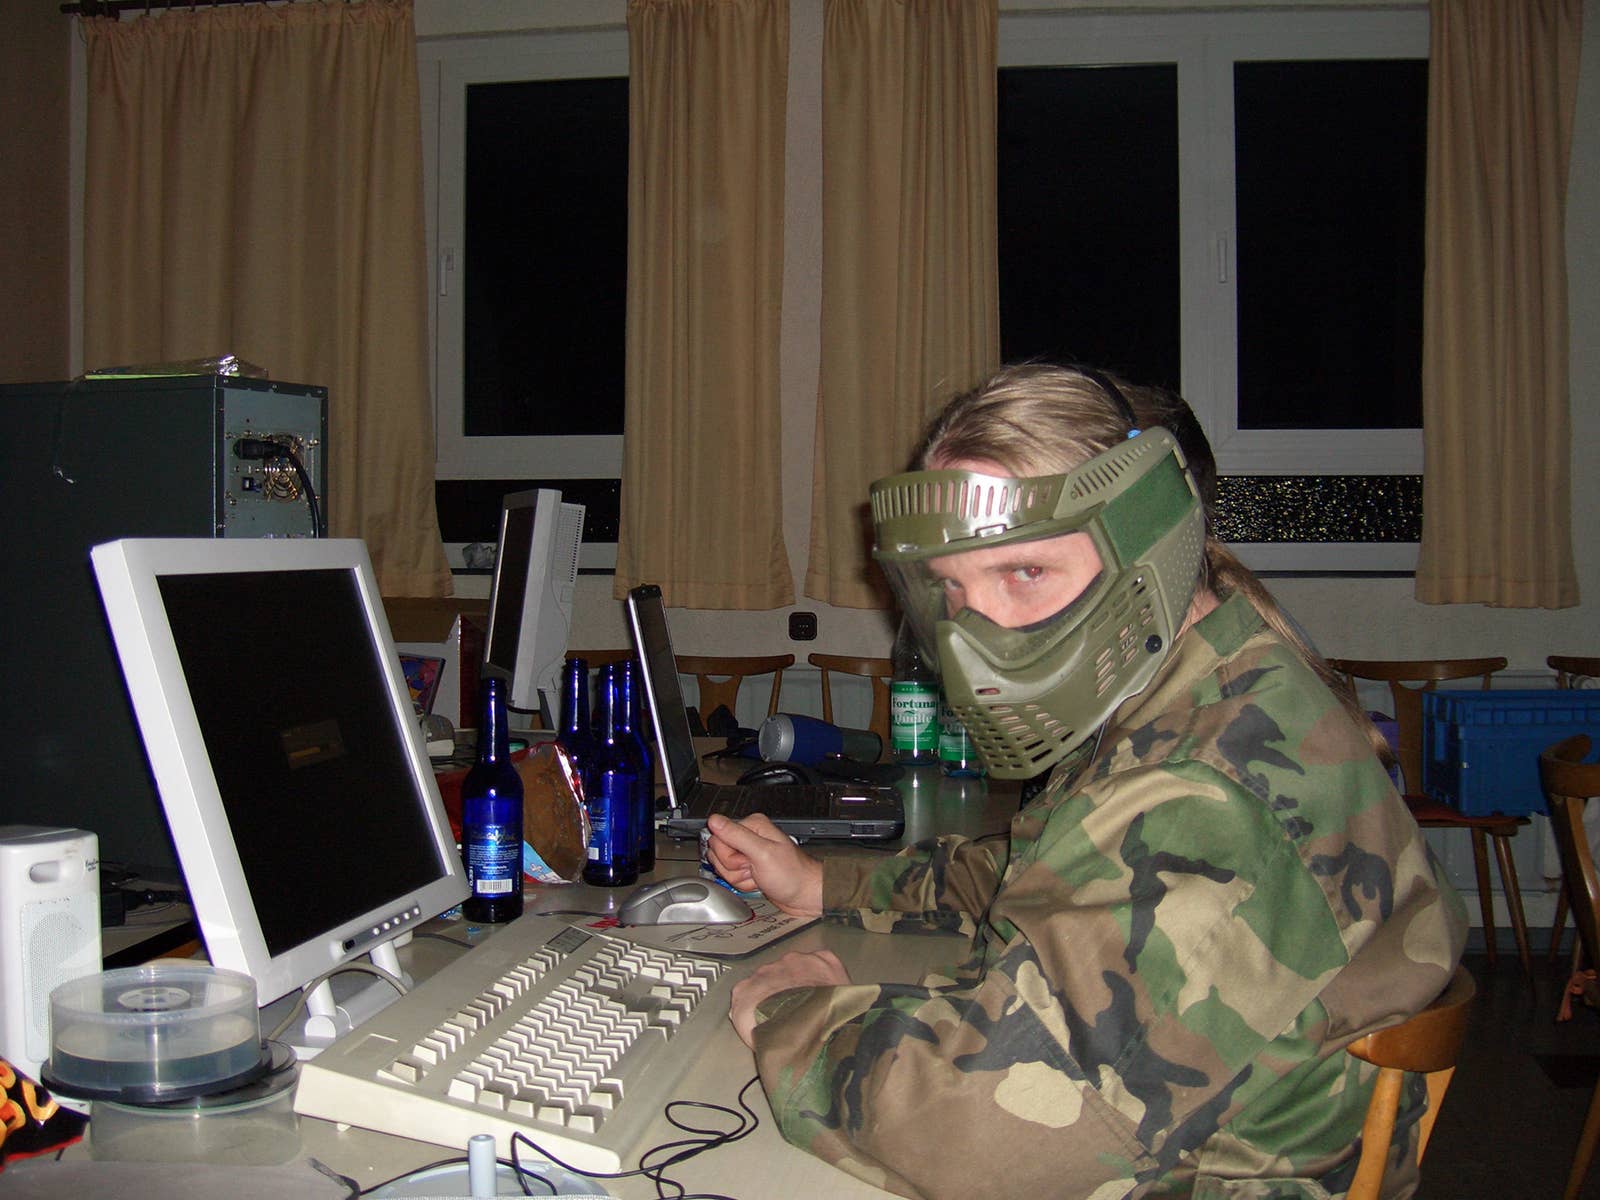 An image of someone at a LAN party